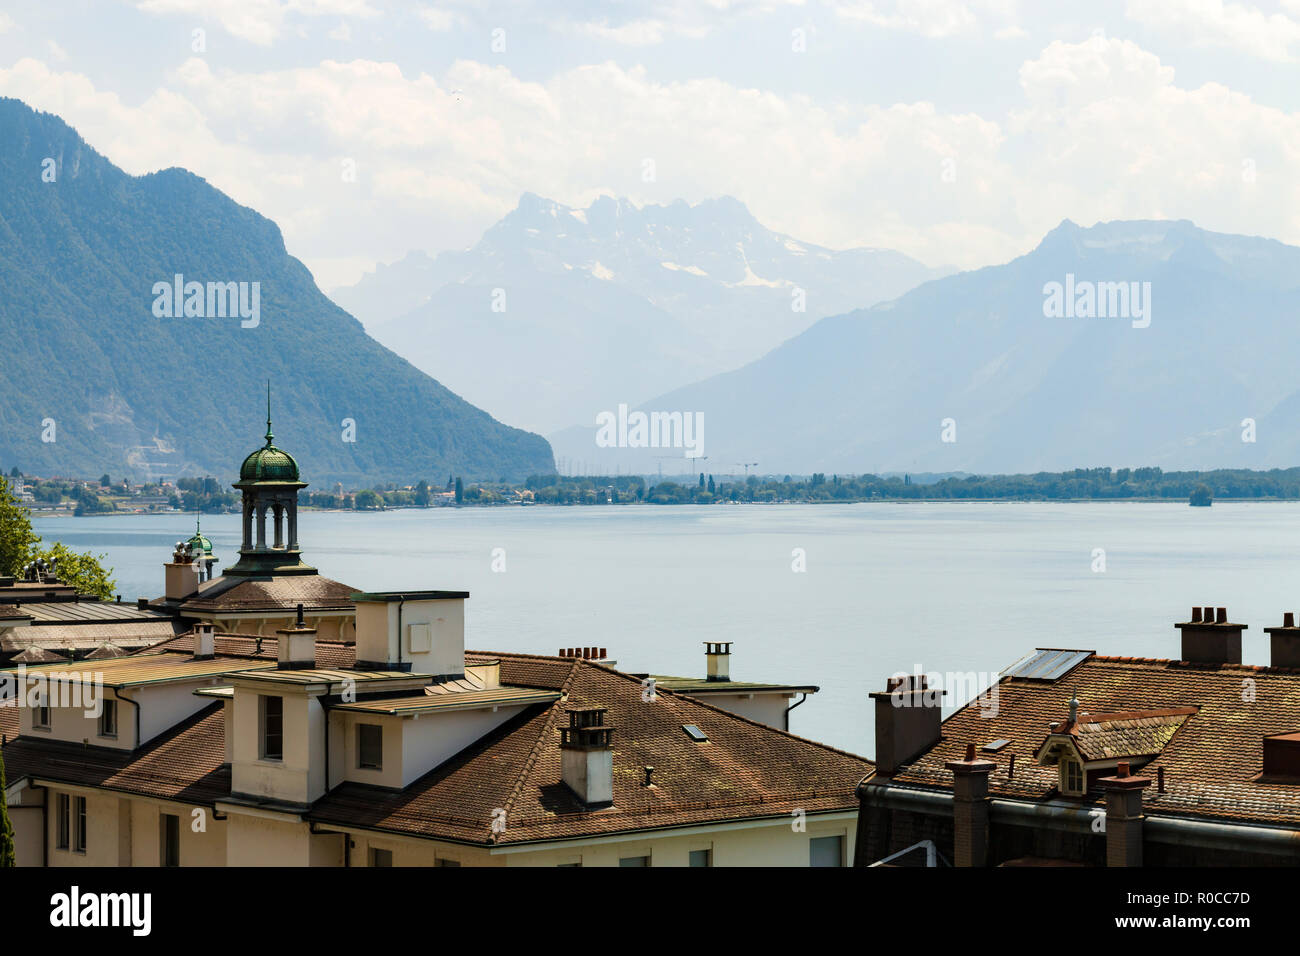 View over roofs at Geneva lake and the Alps in the background Stock Photo